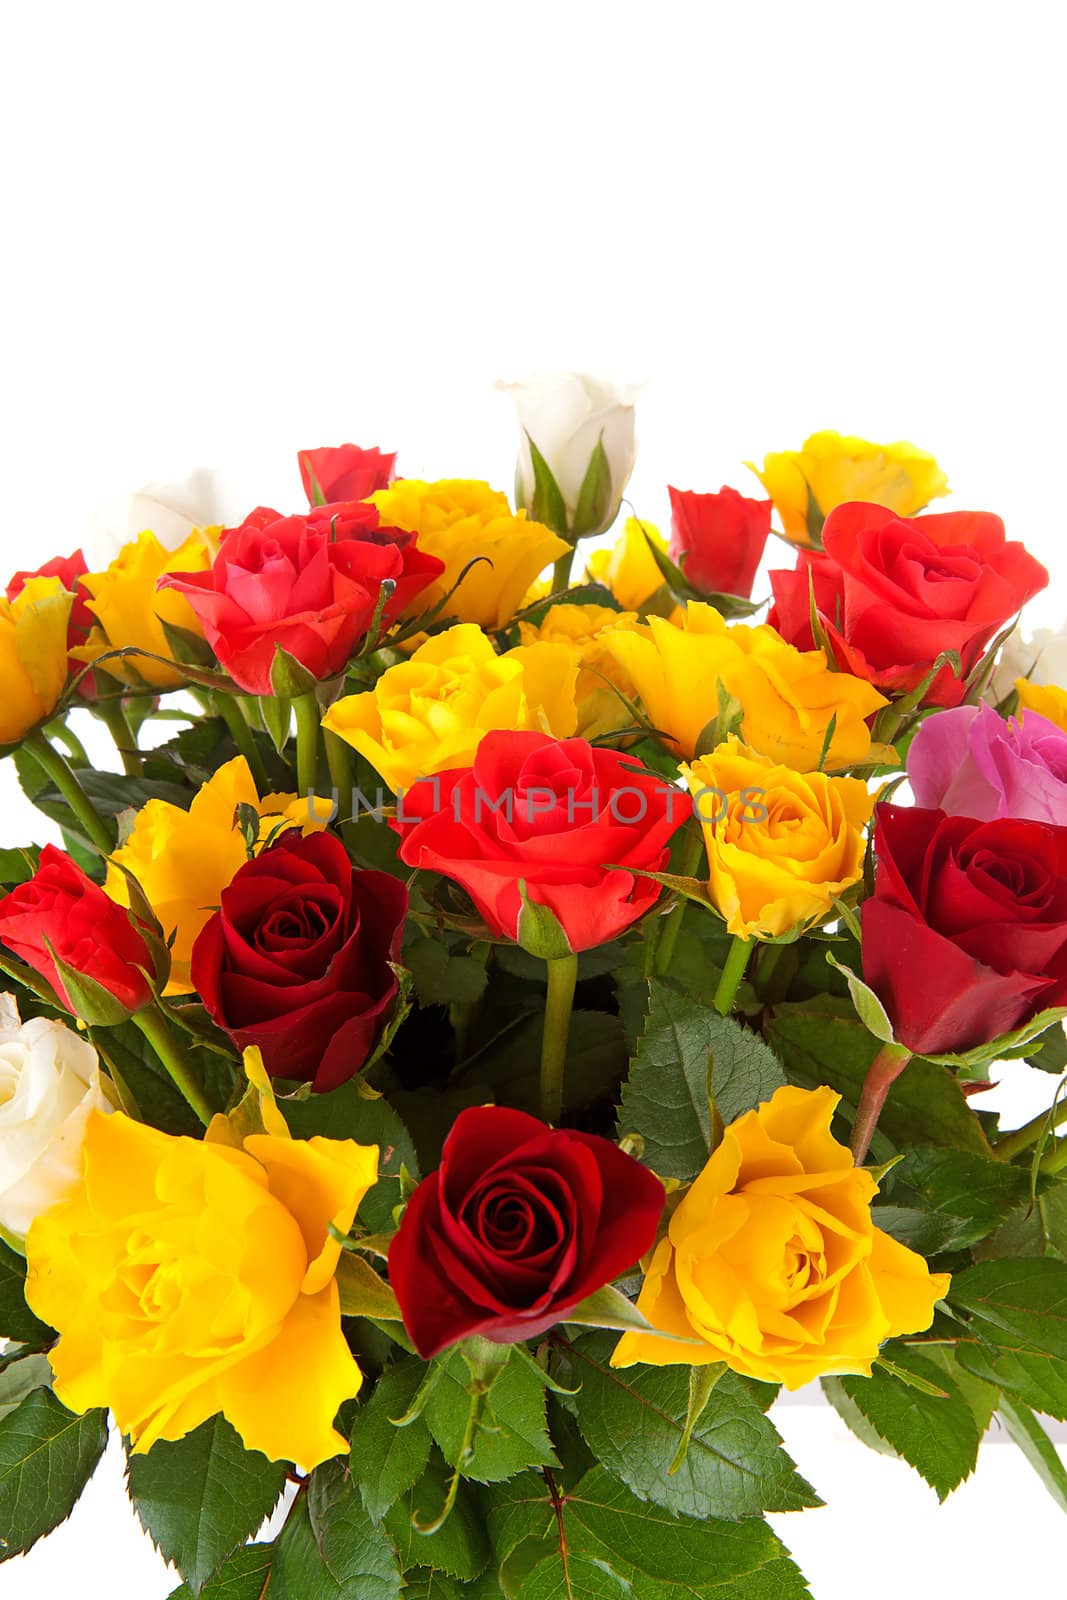 Bouquet of colorful roses over white background